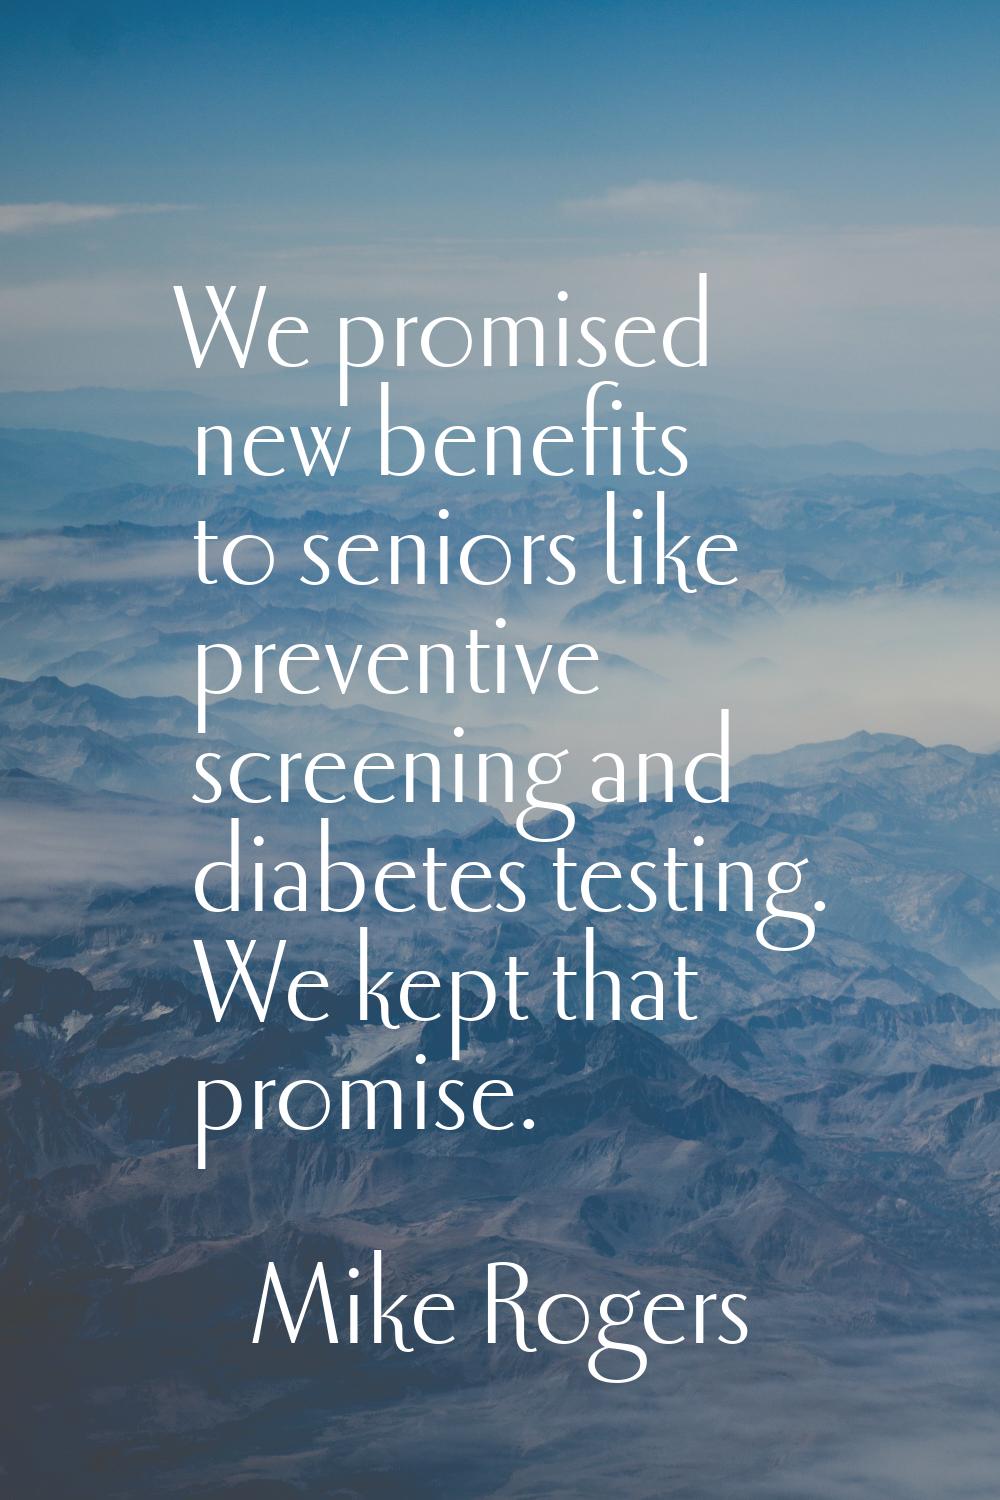 We promised new benefits to seniors like preventive screening and diabetes testing. We kept that pr